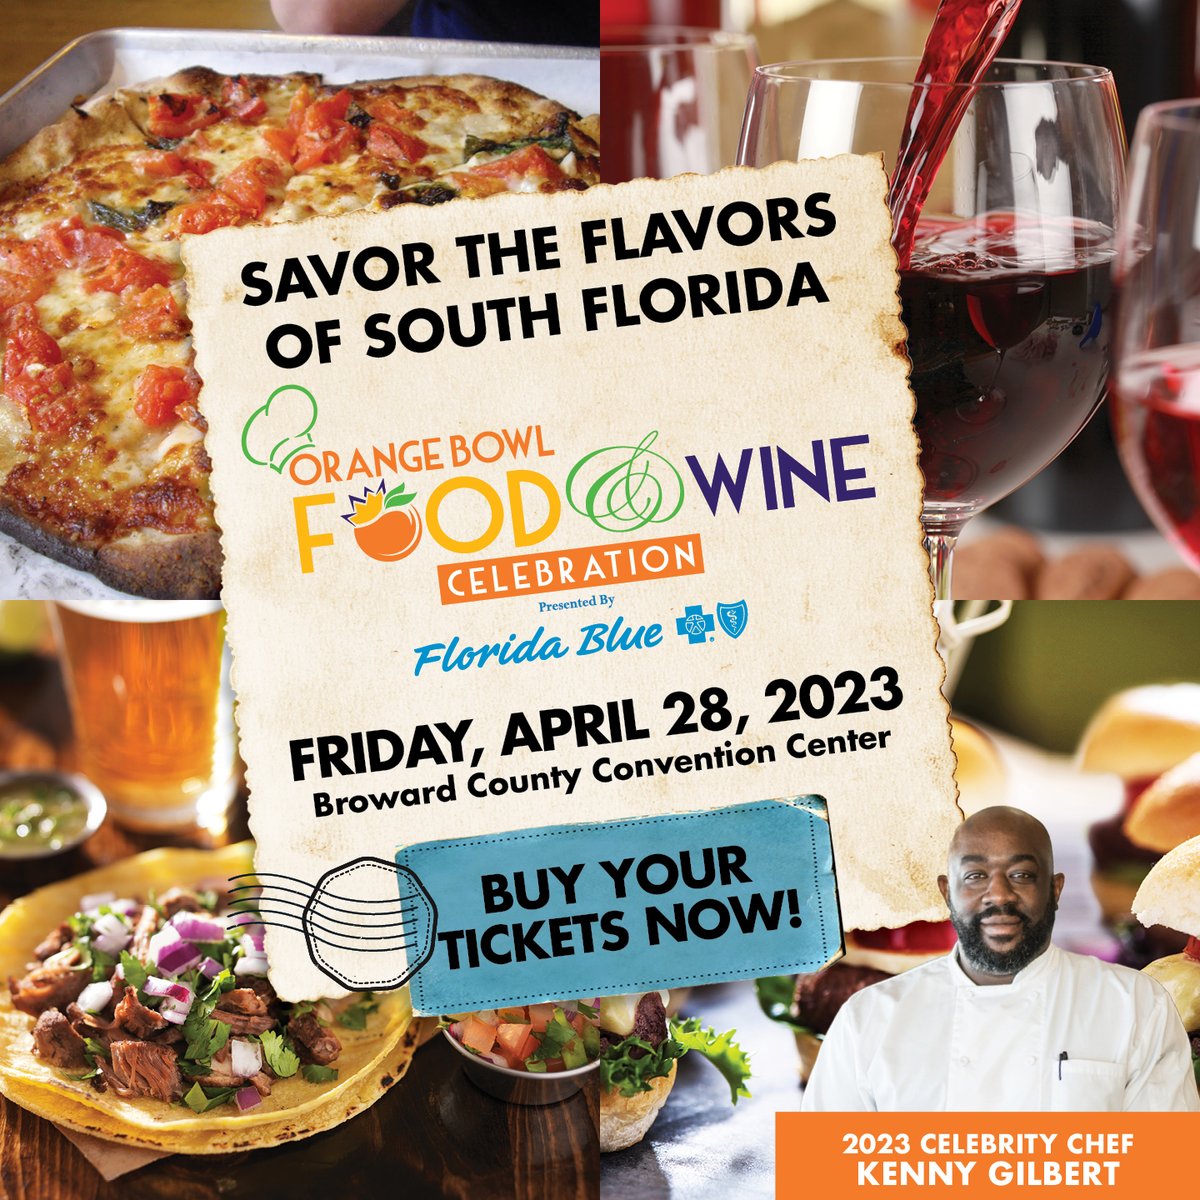 Join me at #OBFW on Friday 4/28 for an extravagant night of food, drinks, and fun! 30 of South Florida’s top restaurants and chefs will be in attendance. Proceeds benefit @makeawishsfla, @SpecialOlympics & #OrangeBowlCares.
Get your tickets now: bit.ly/OBFW2023